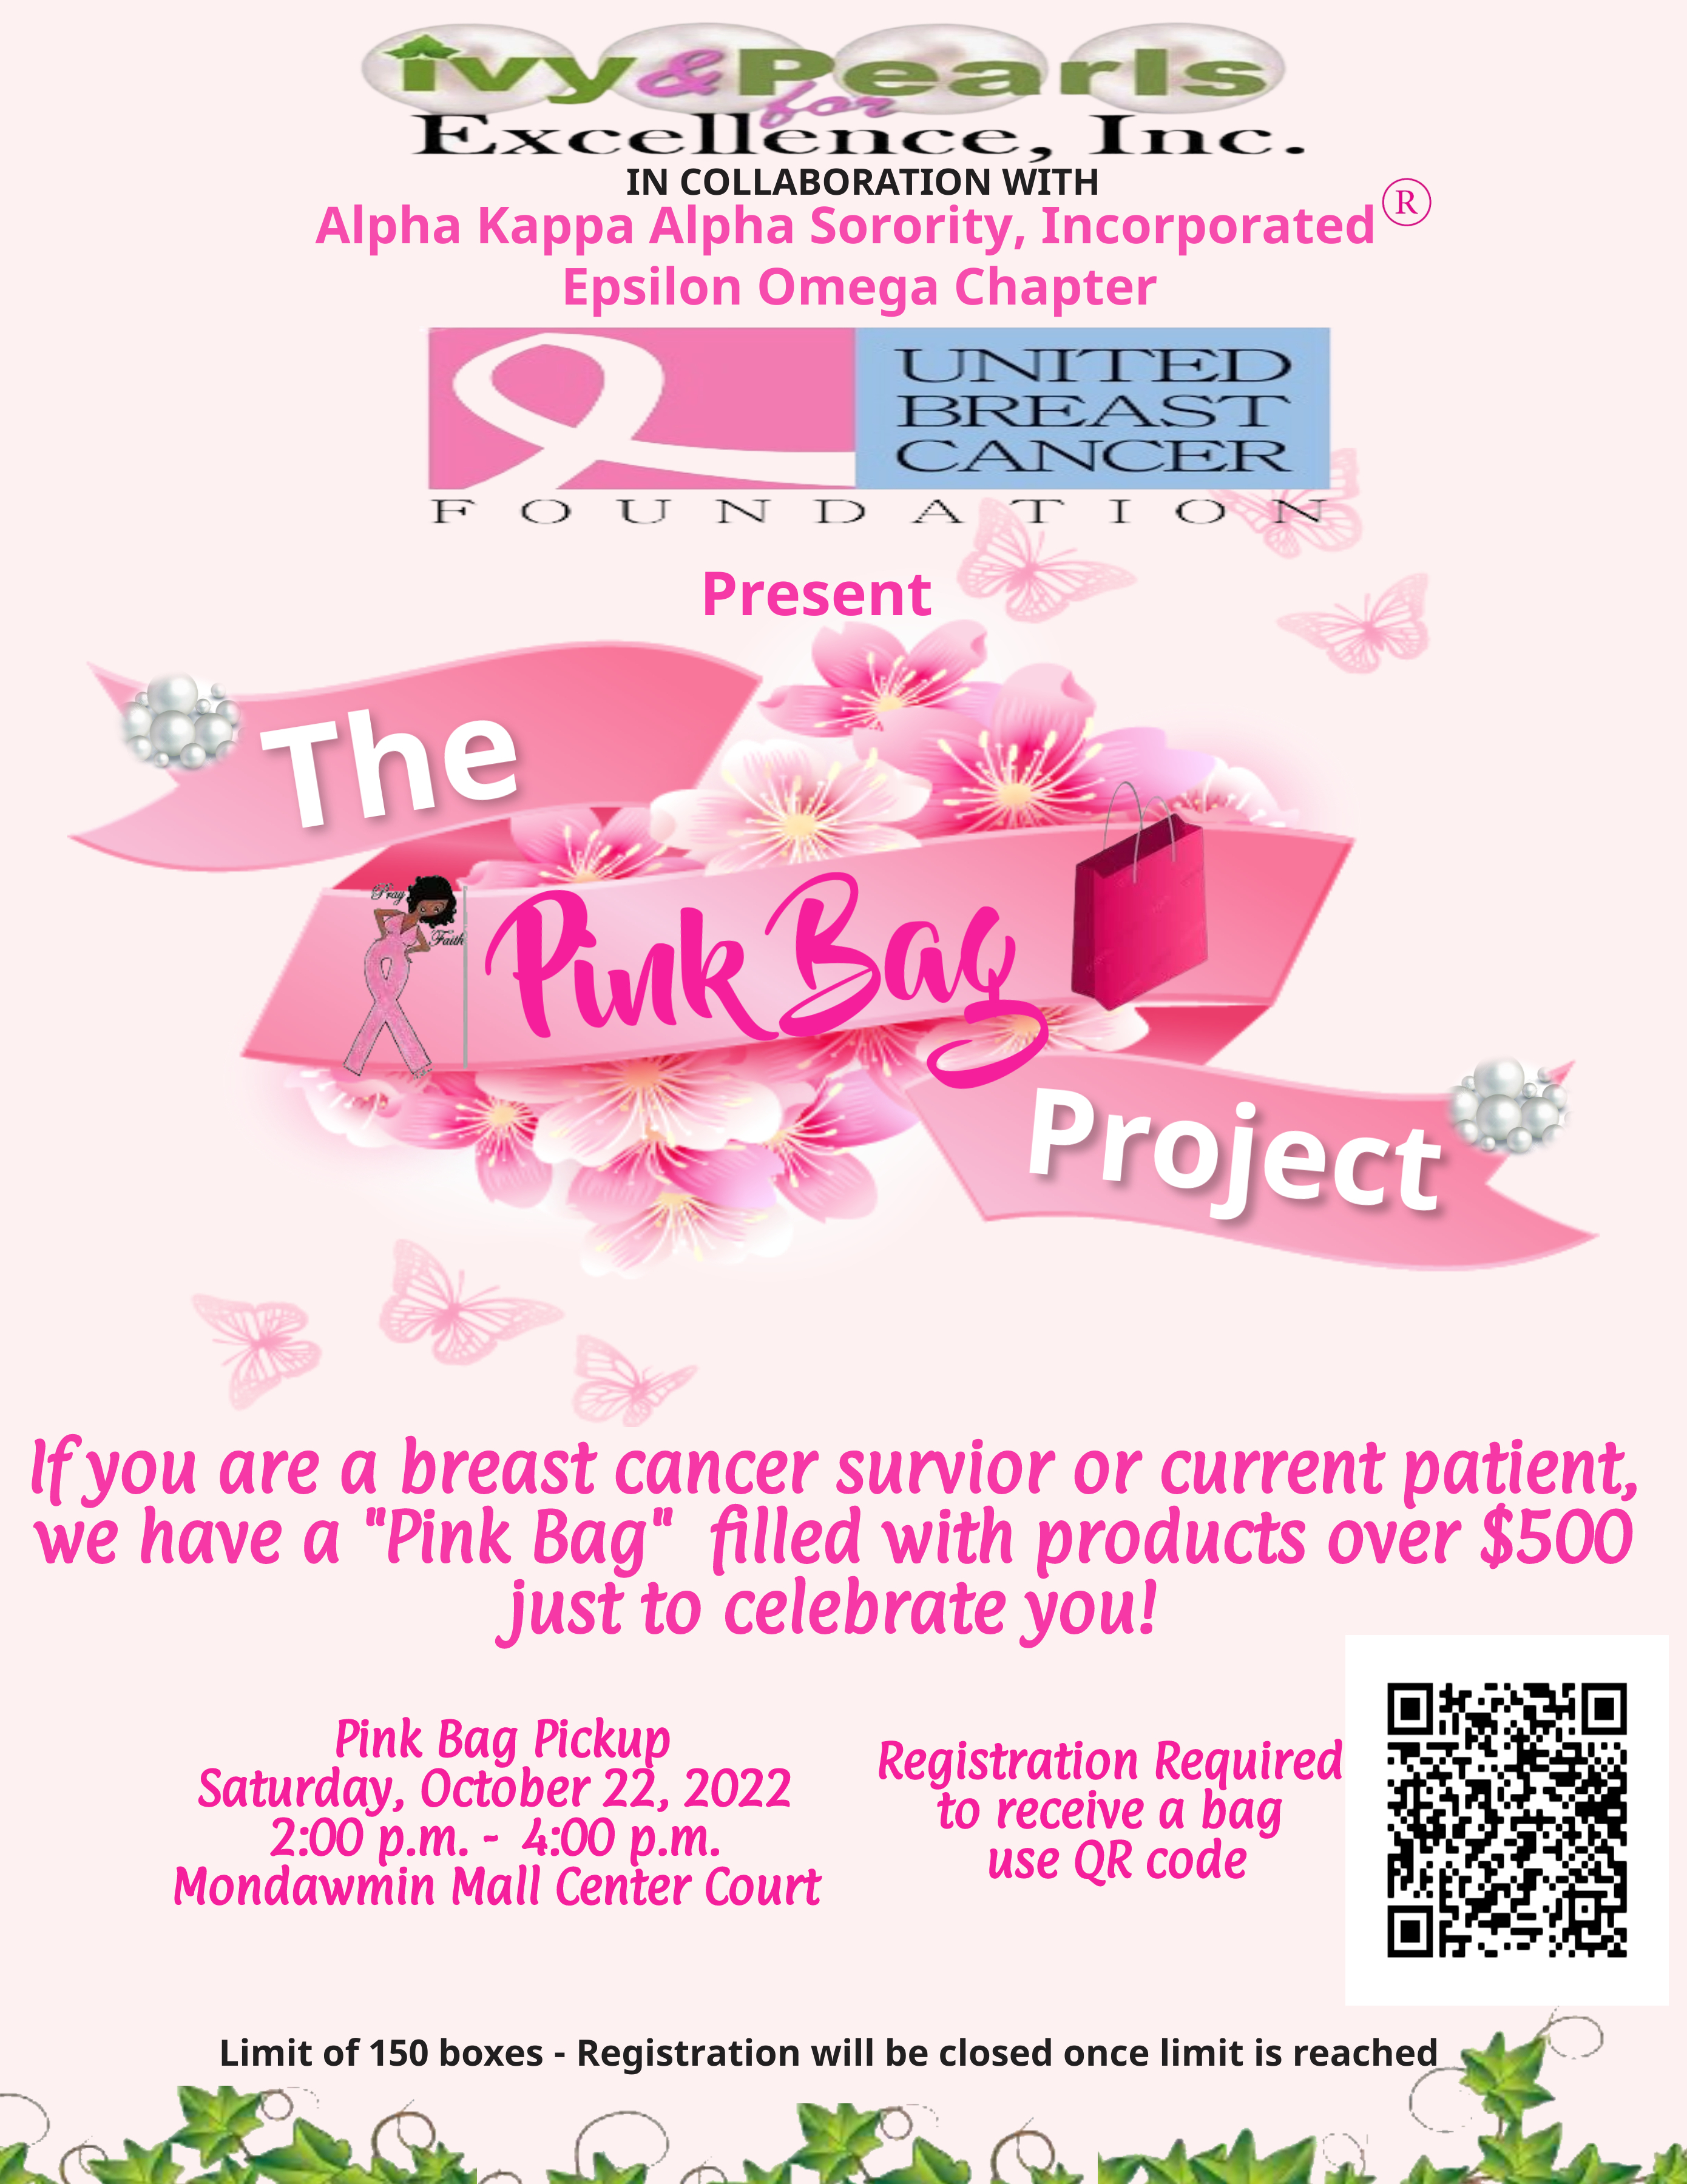 The Pink Bag Project